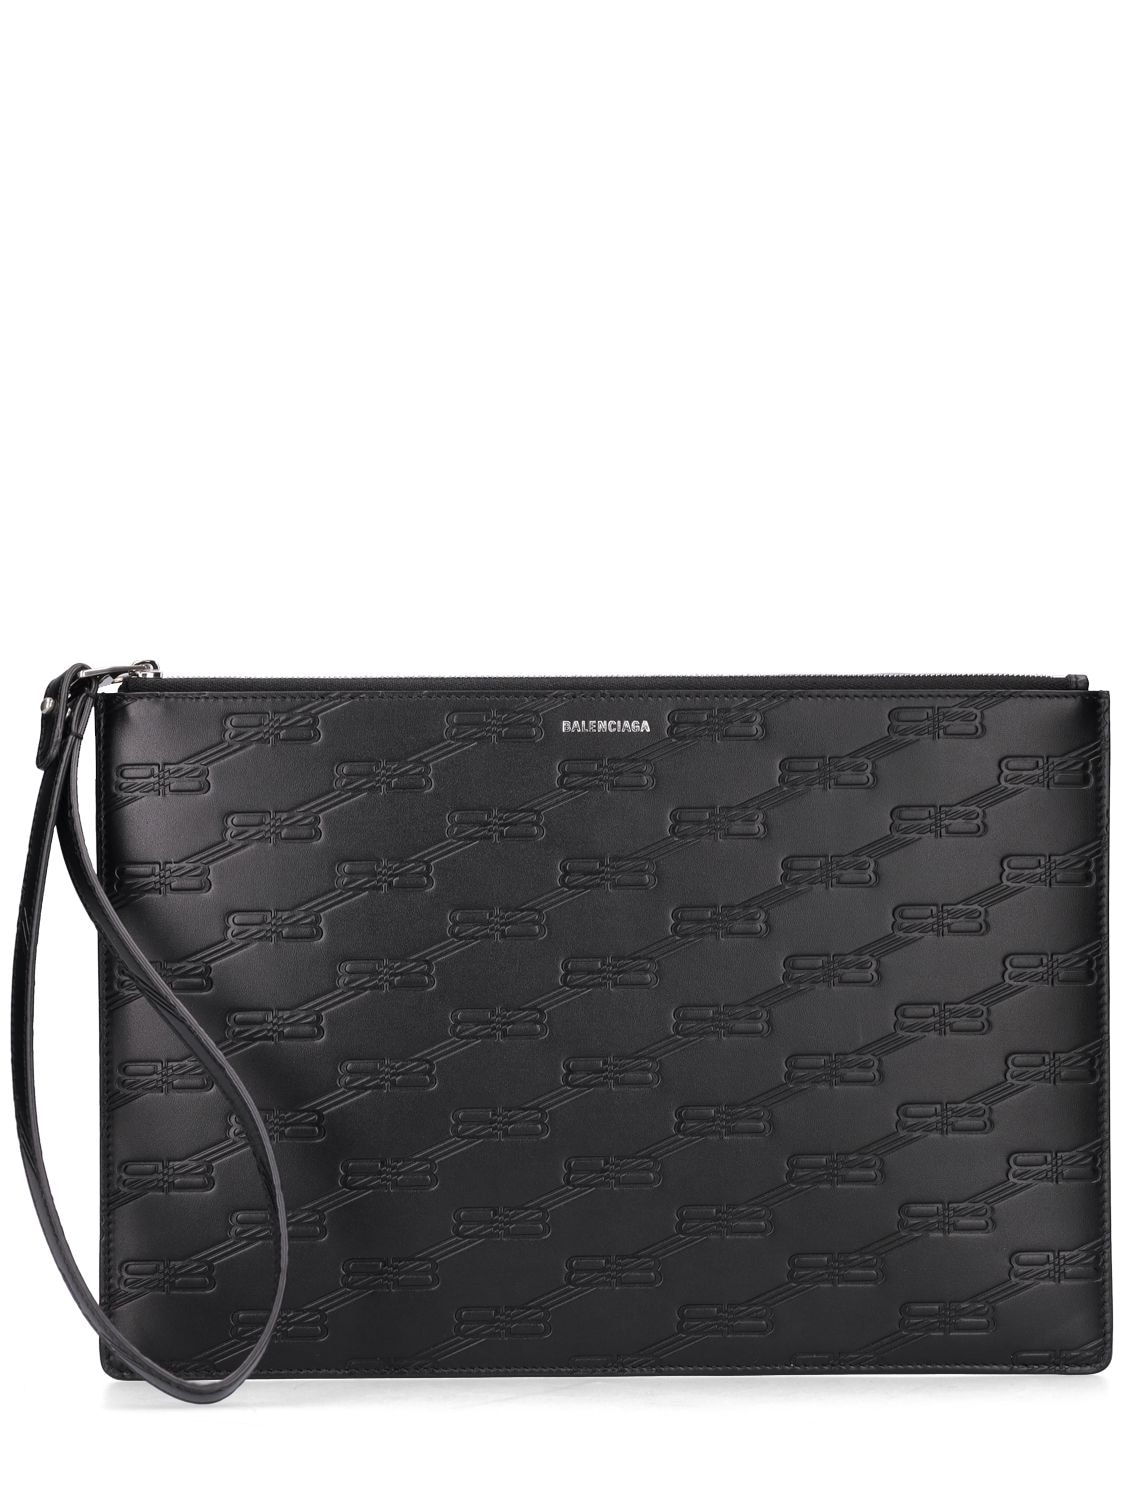 Balenciaga Embossed Leather Pouch W/ Wrist Strap In Black